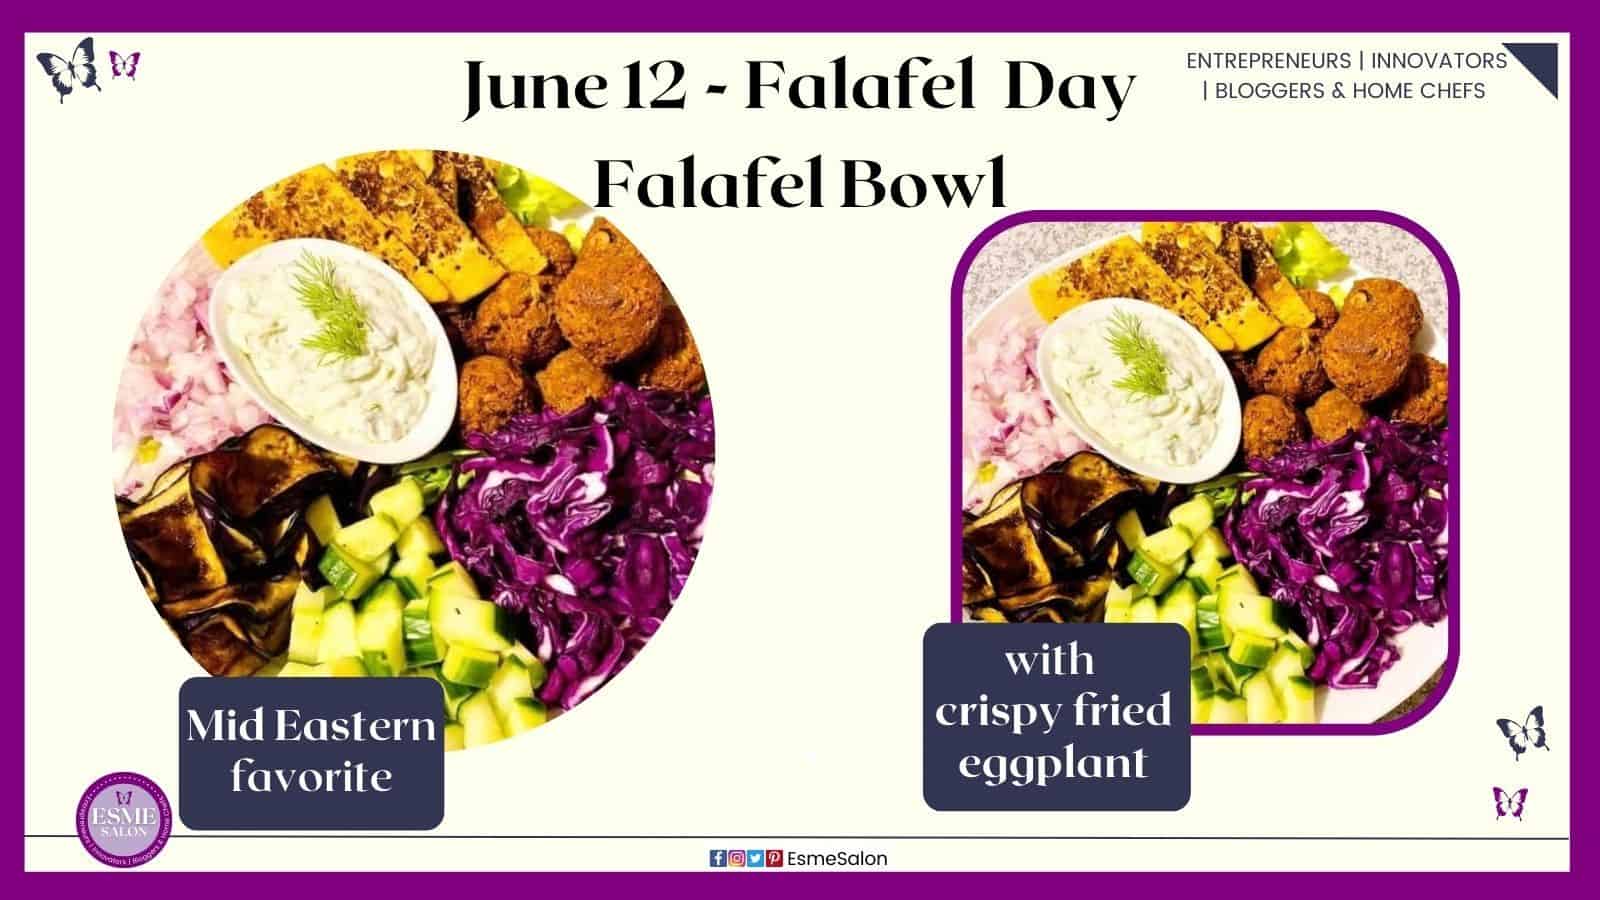 an image of Falafel Bowl served with chickpea flatbread